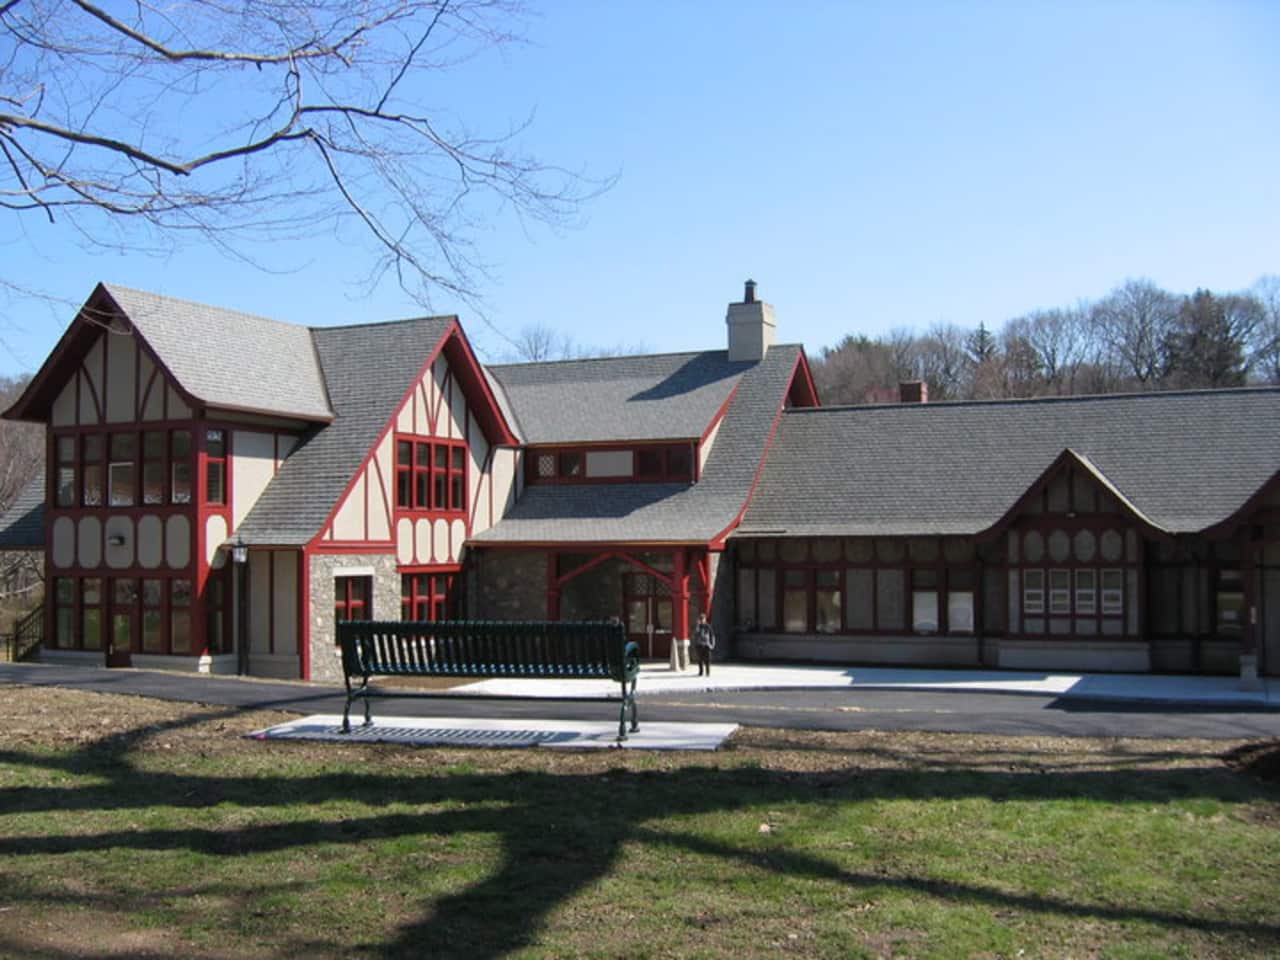 The second part of a program given by architect Michael Molinelli about Hudson Valley architecture will be held at the Briarcliff Public Library on Tuesday, March 15, at 7 p.m.